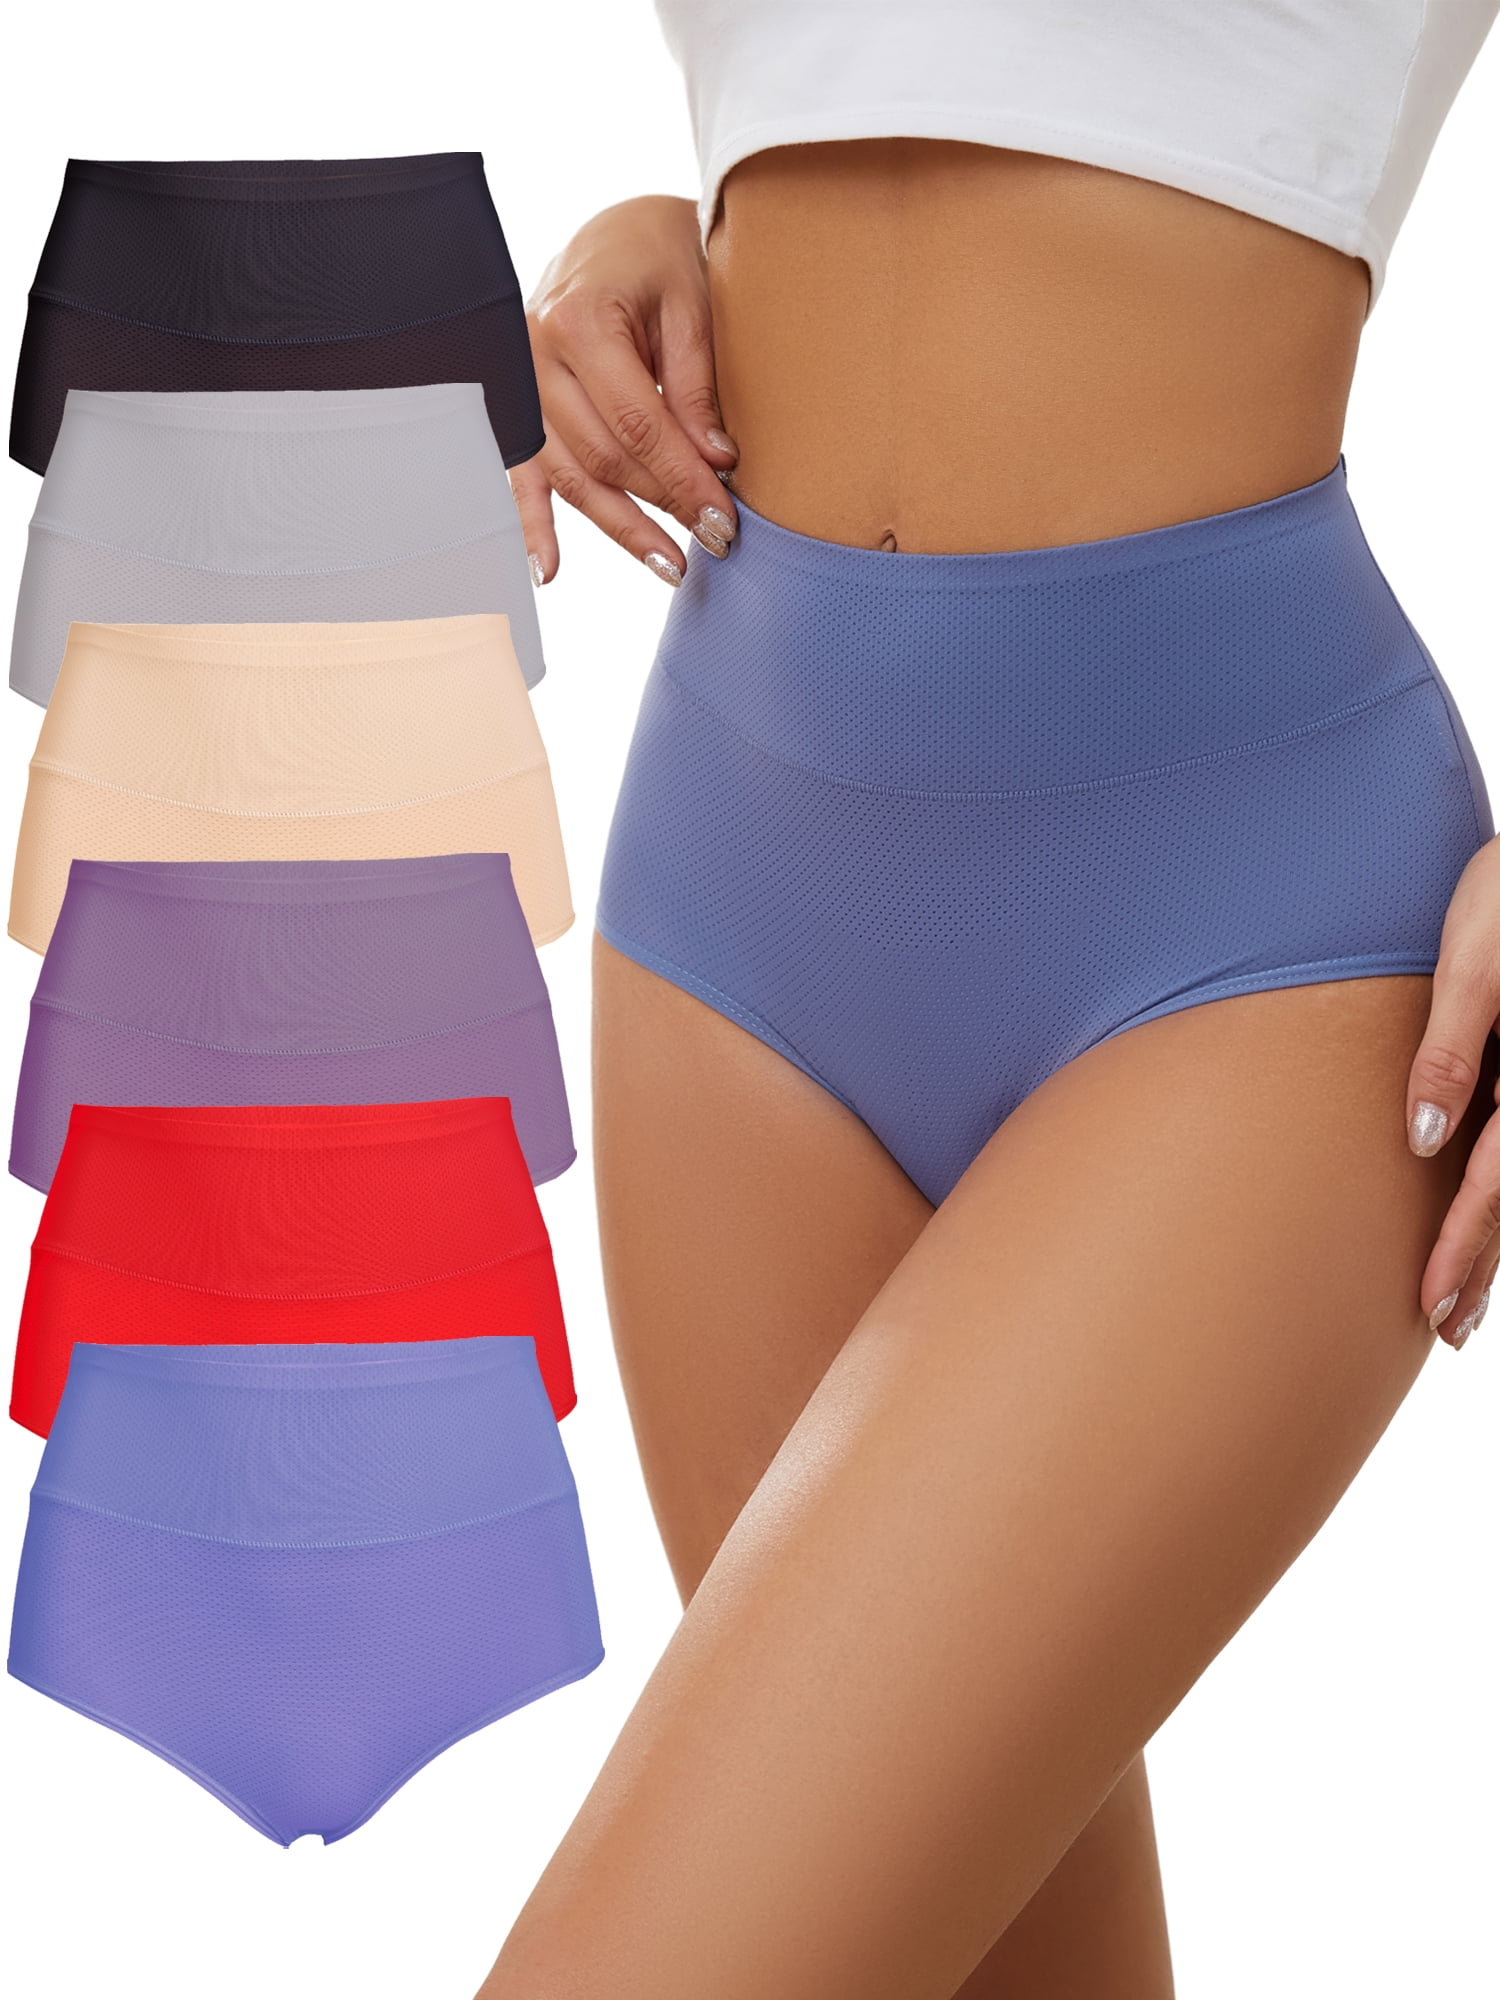 Buankoxy 5 Pack High Waisted Underwear for Women Seamless Panties Ladies  Invisible Briefs(Size 6)